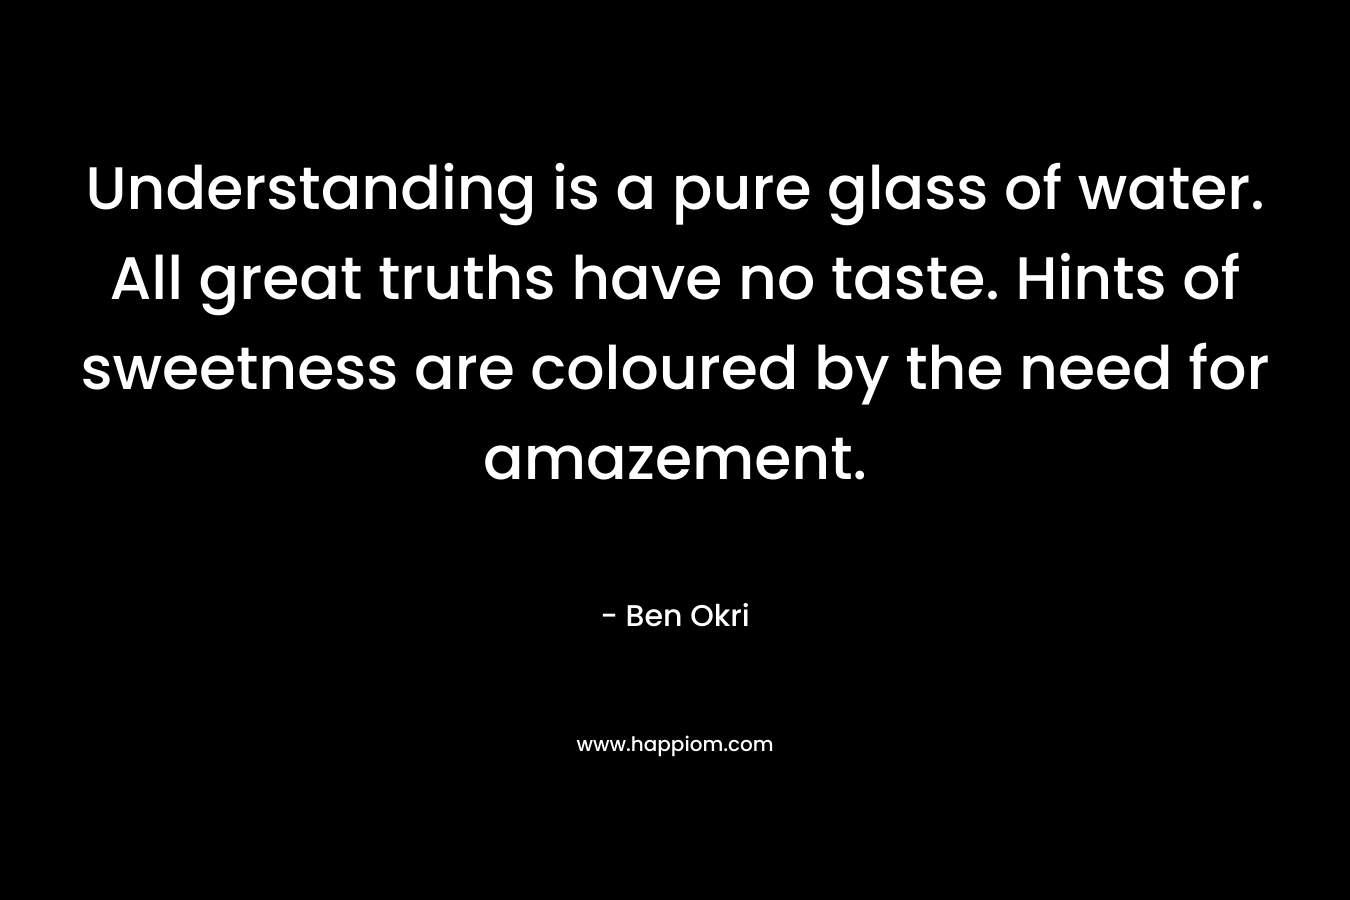 Understanding is a pure glass of water. All great truths have no taste. Hints of sweetness are coloured by the need for amazement. – Ben Okri